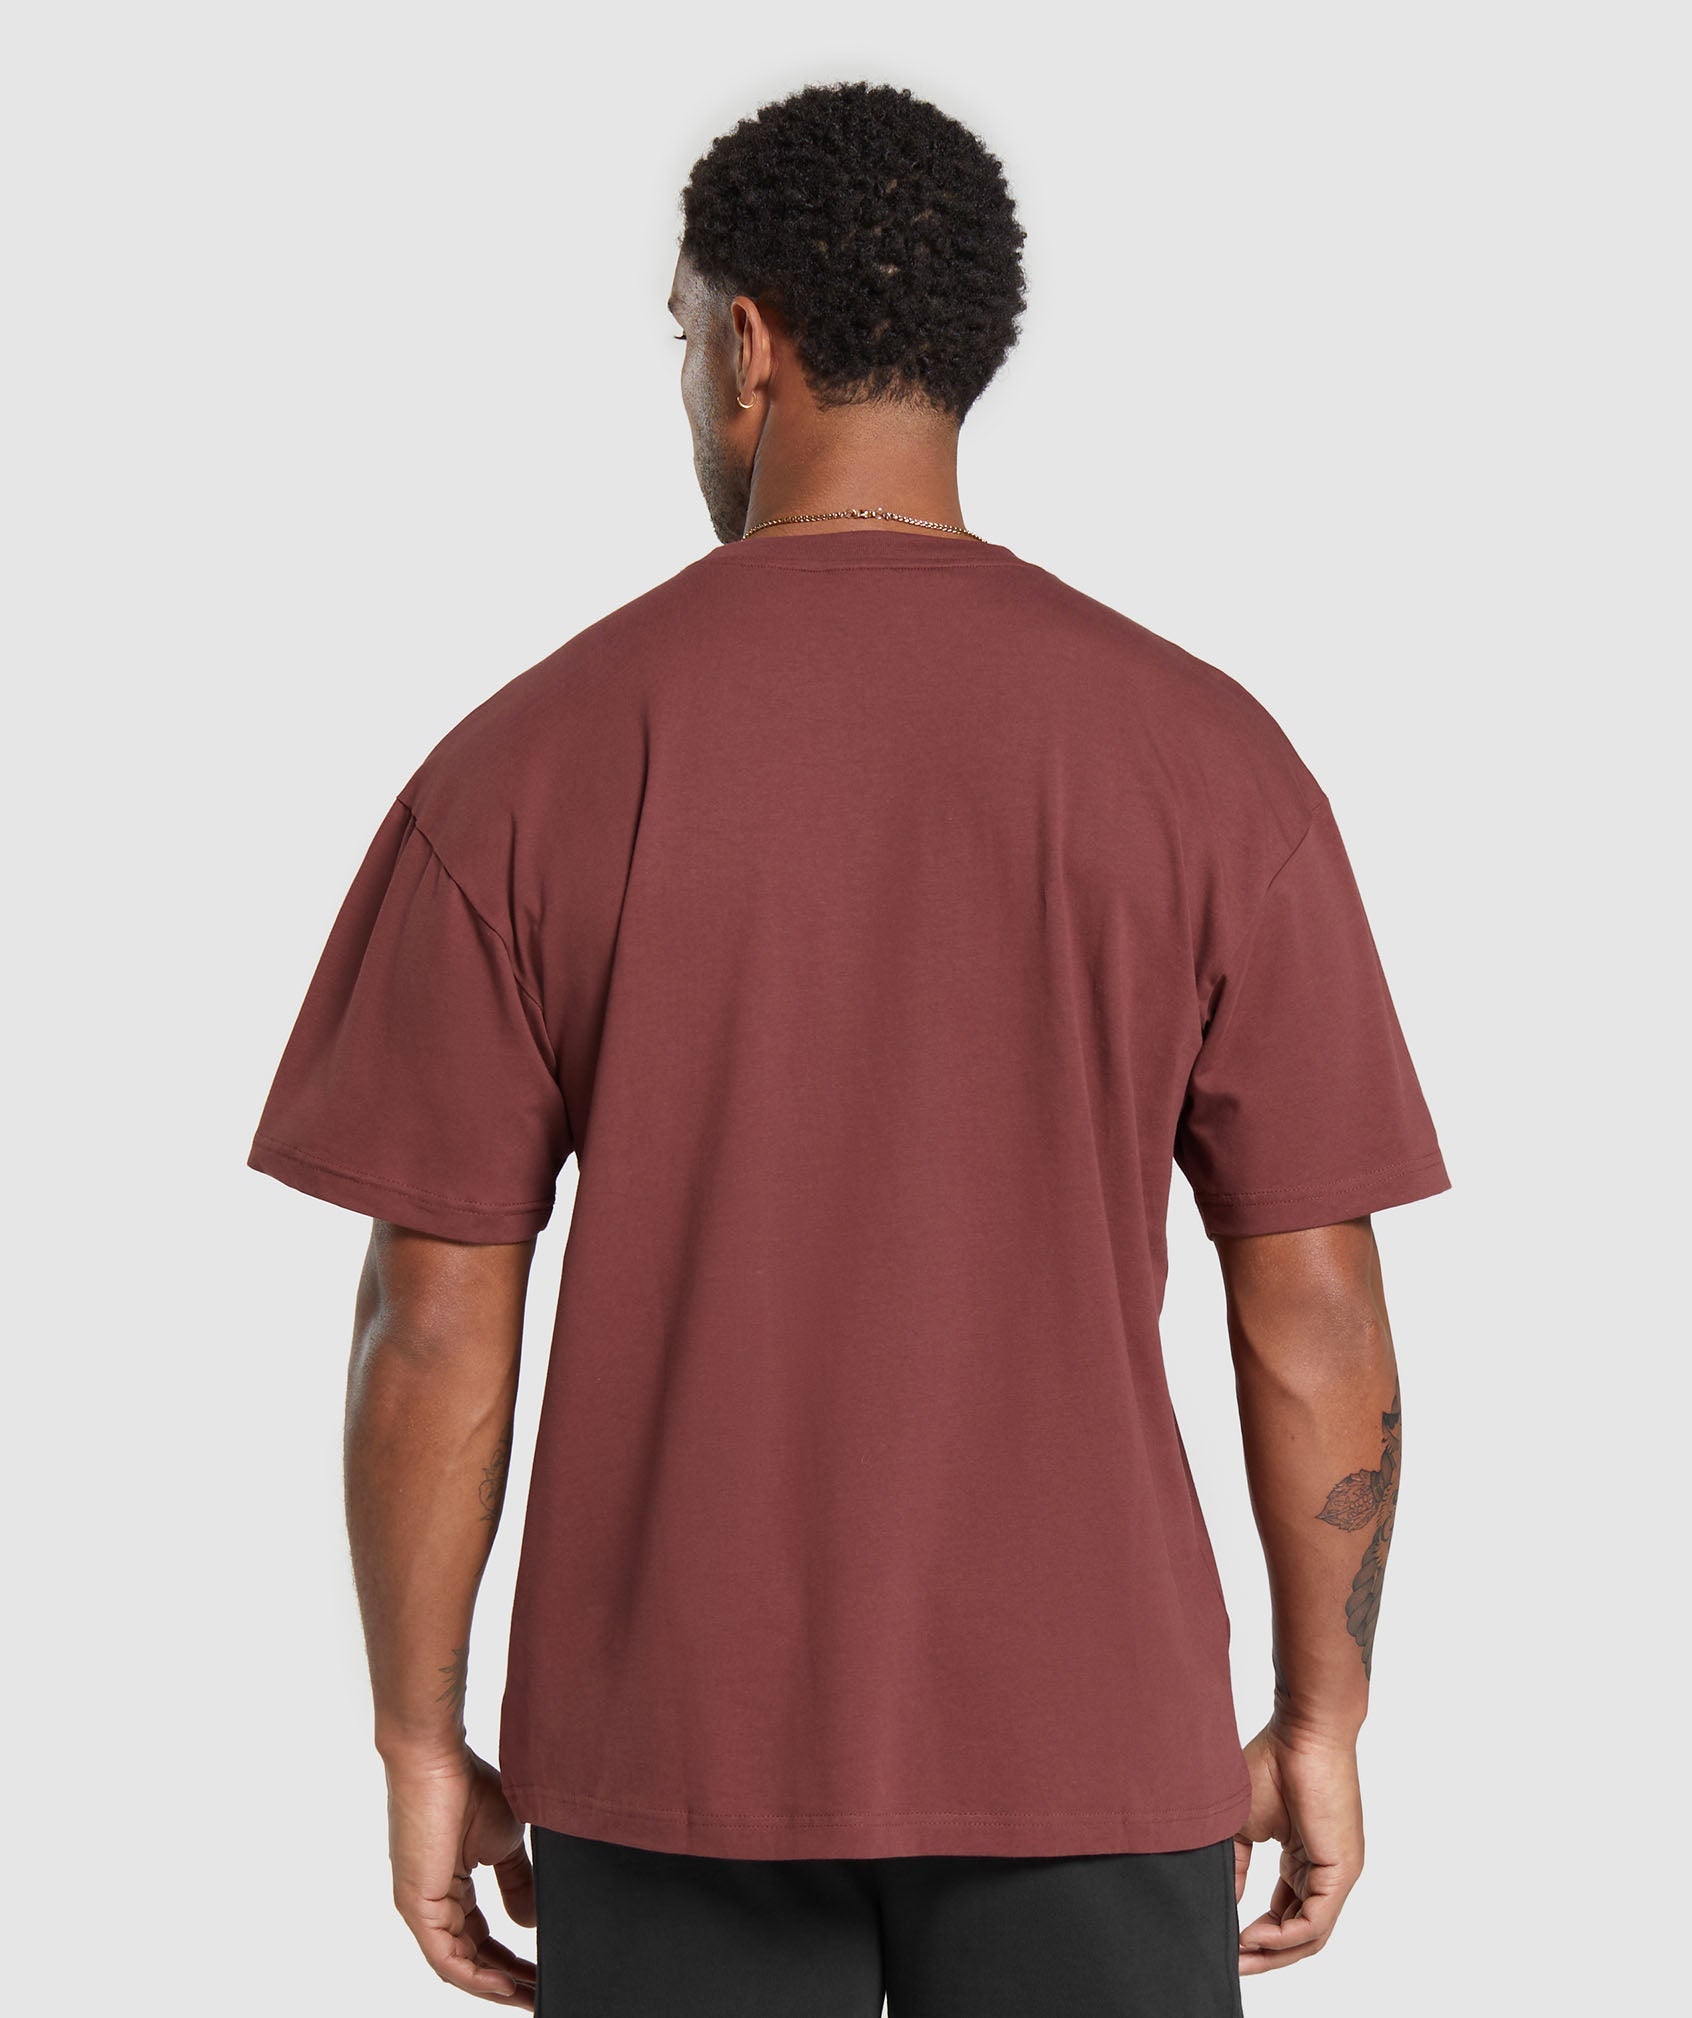 Essential Oversized T-Shirt in Burgundy Brown - view 2